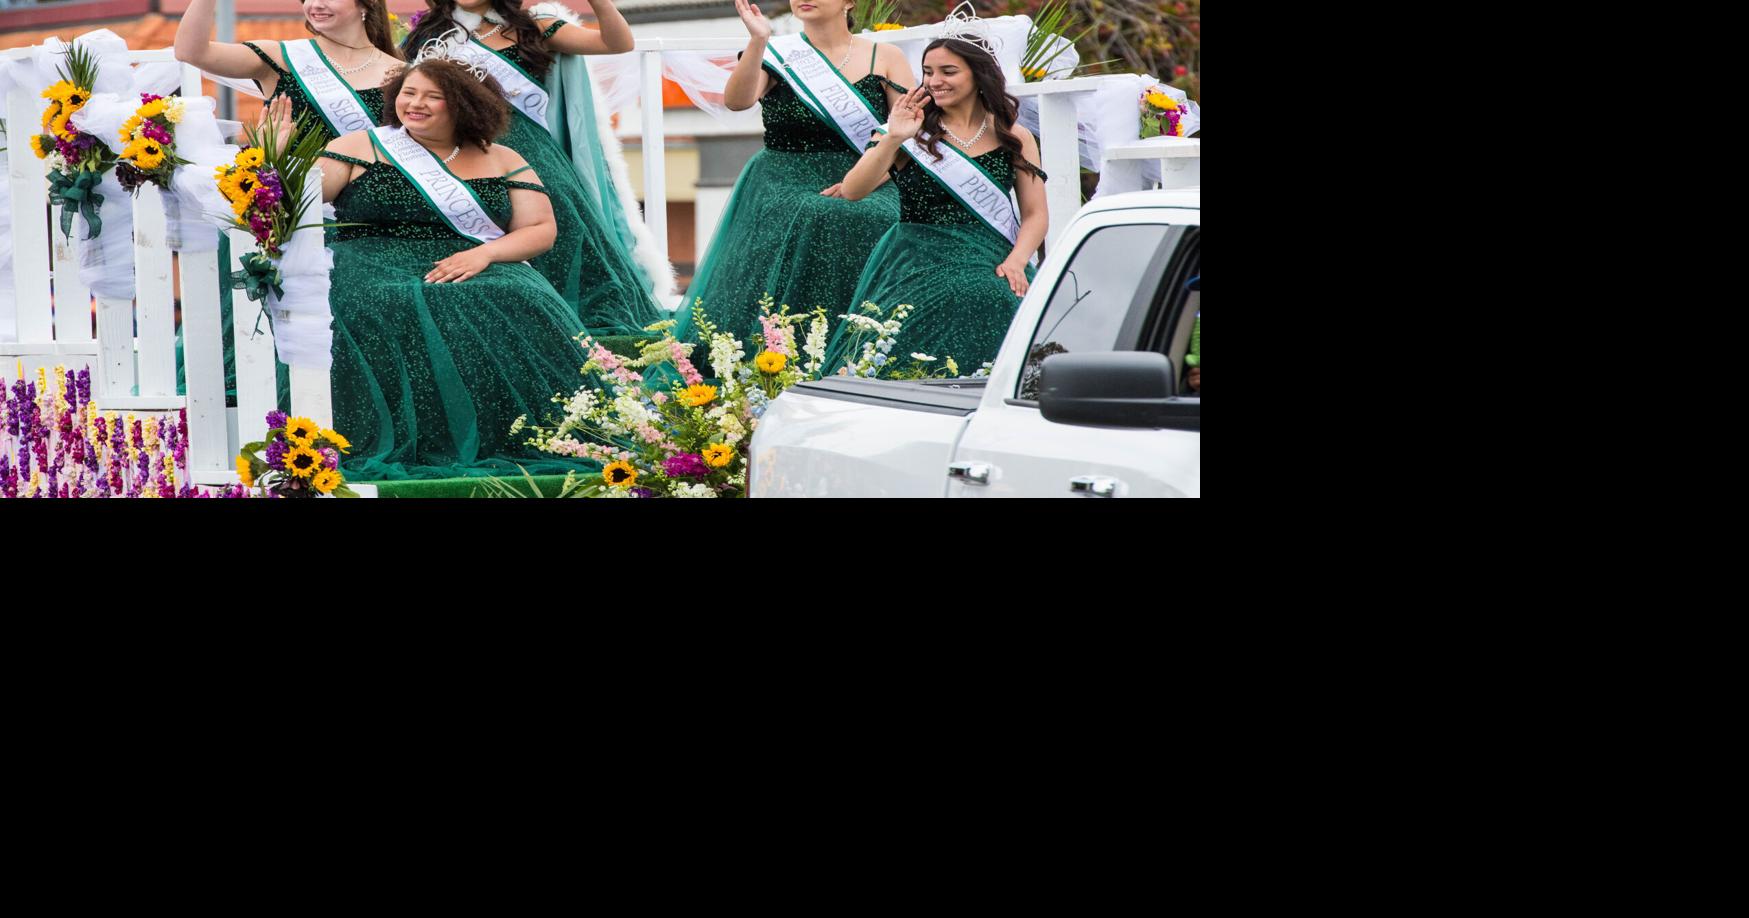 Lompoc Flower Festival Parade makes triumphant return in 70th year